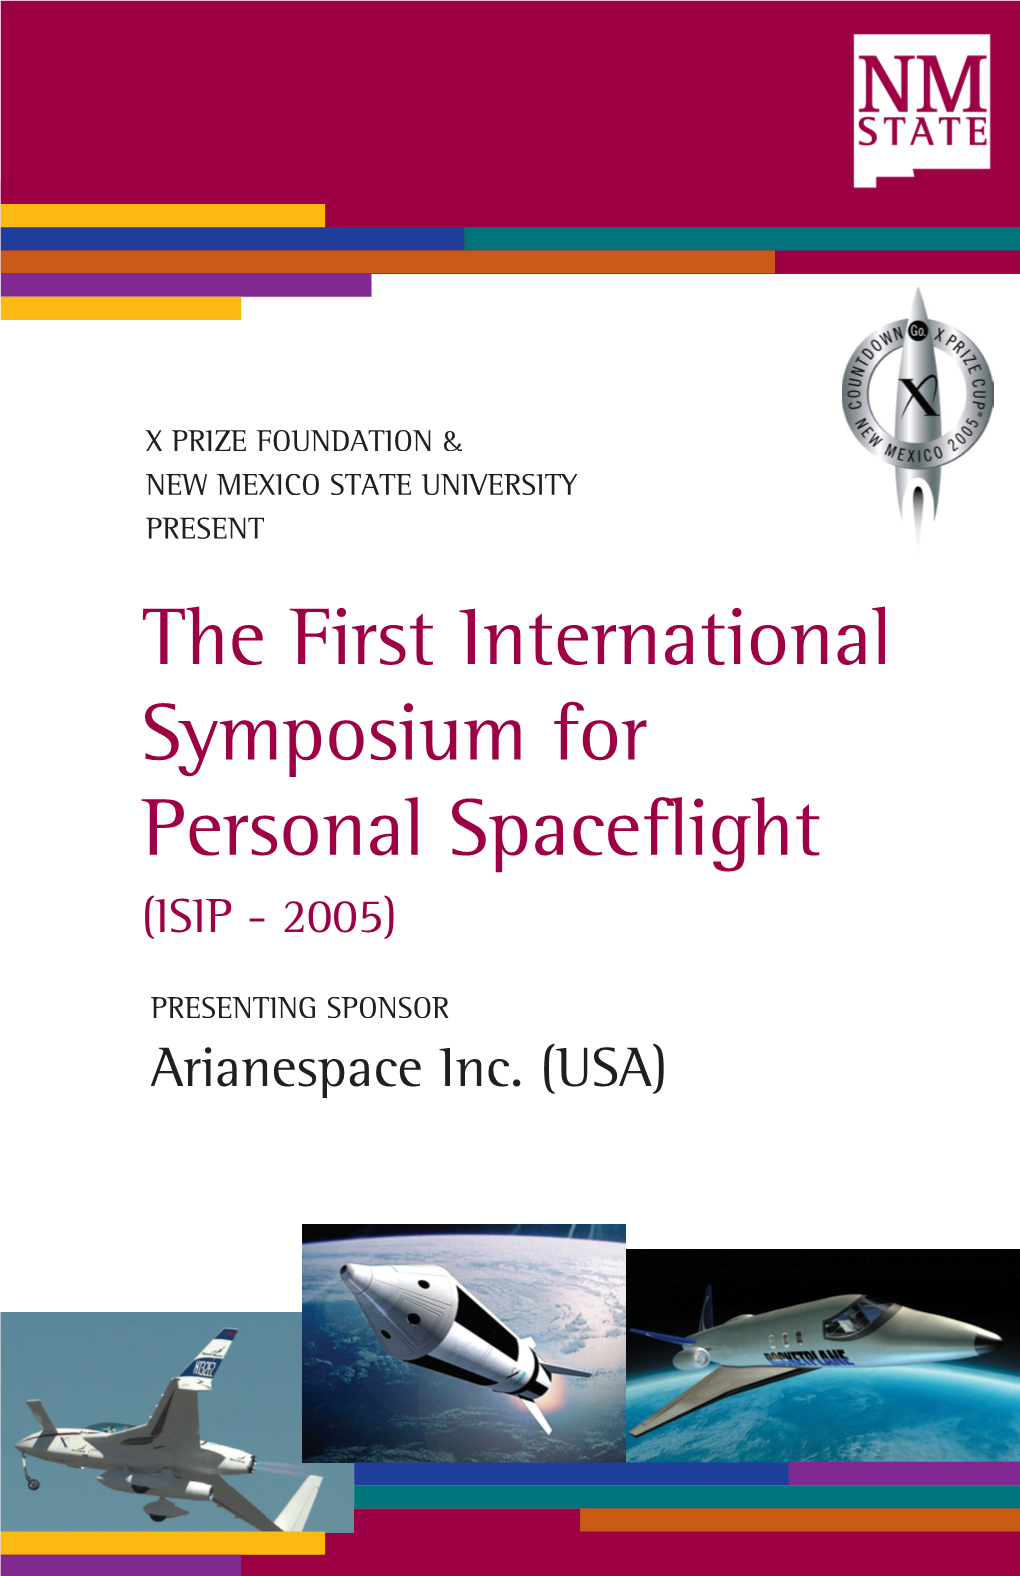 The First International Symposium for Personal Spaceflight (ISIP - 2005)